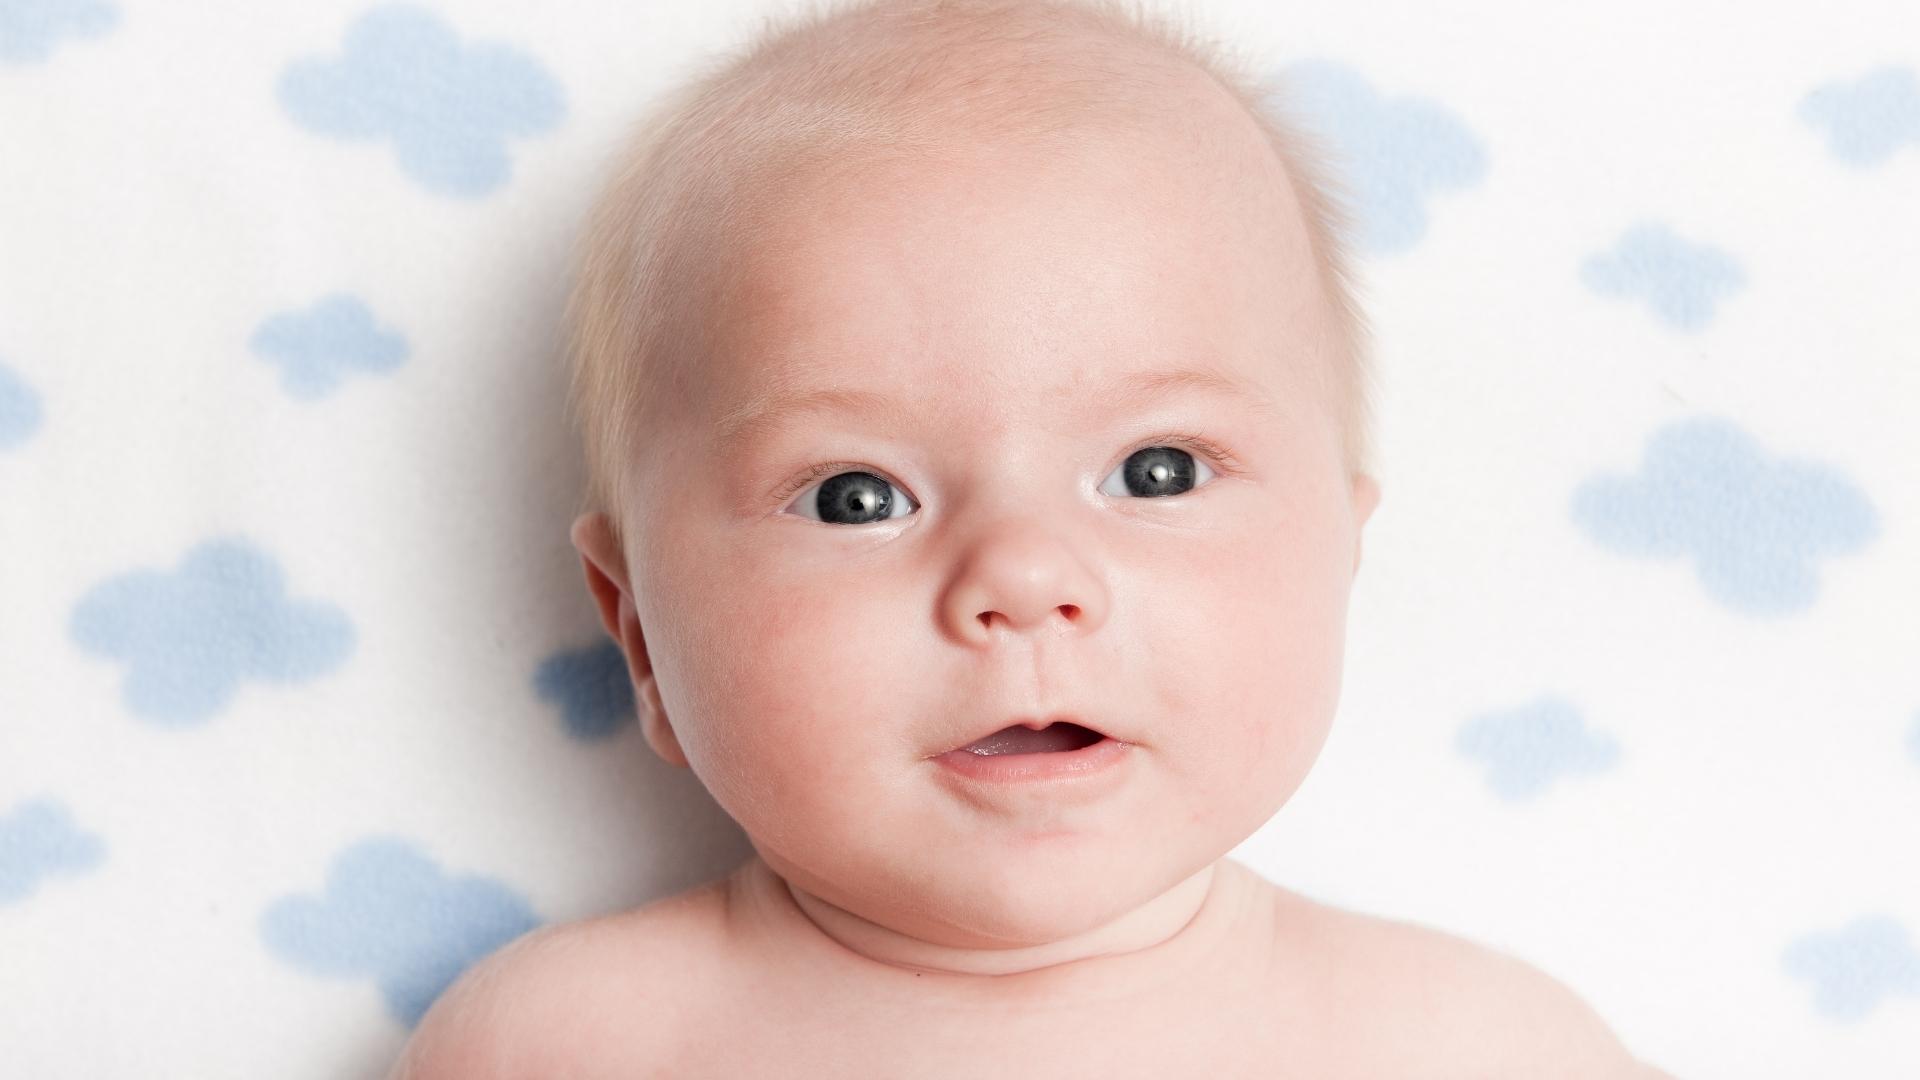 Why Do Babies Stare? 11 Cute Reasons Why & What They Mean